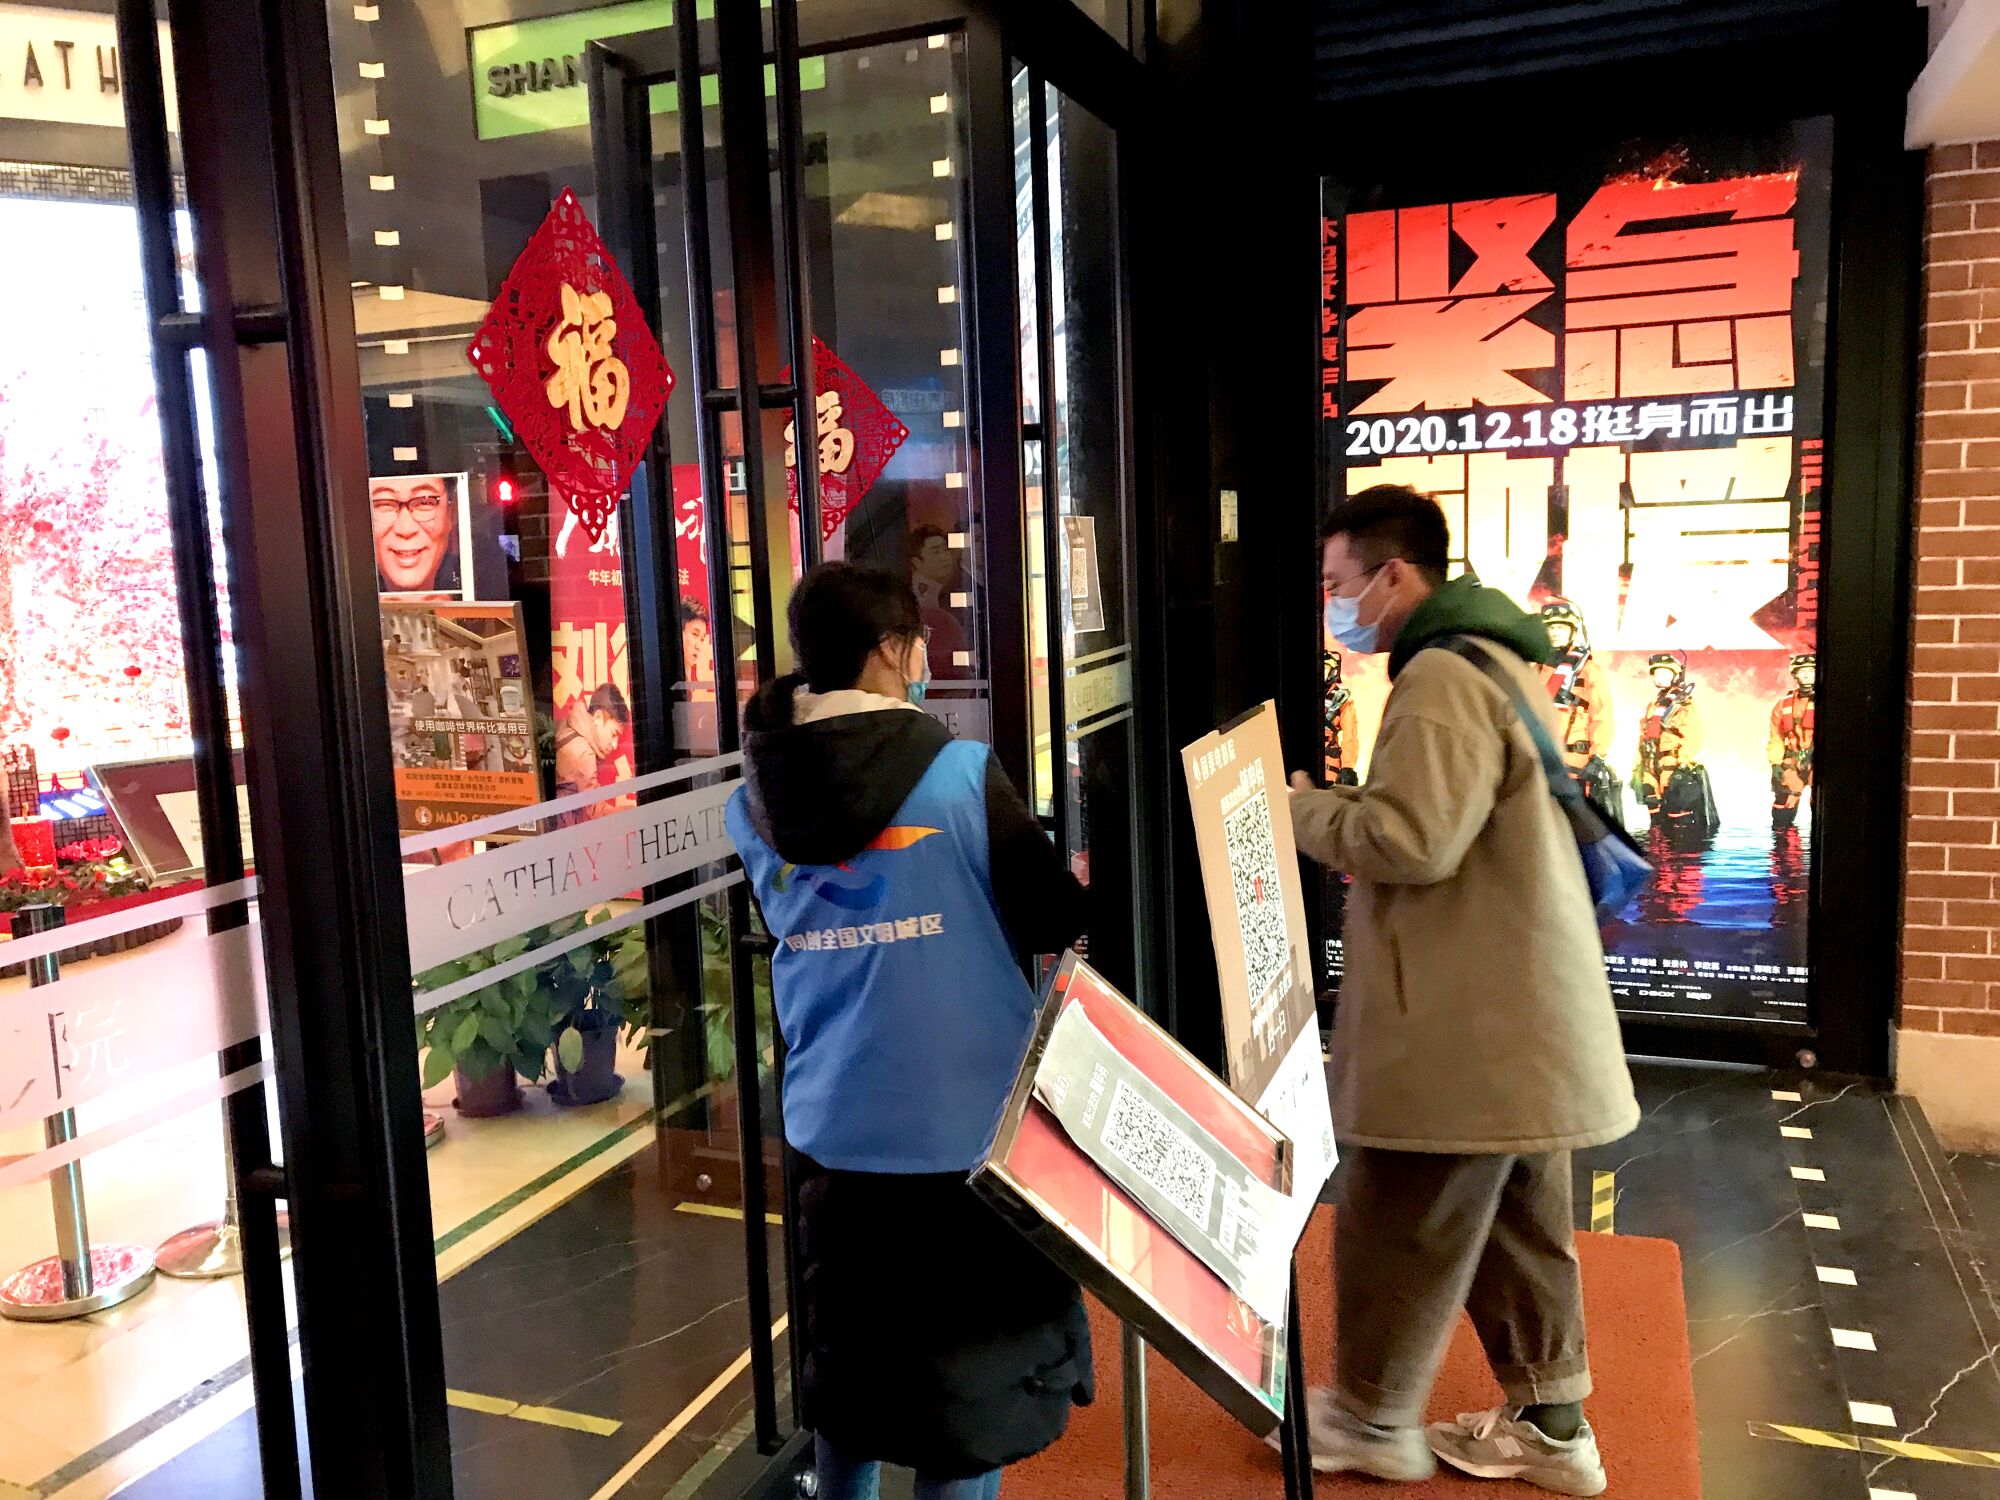 A cinema worker interacts with a moviegoer outside a theater in China.